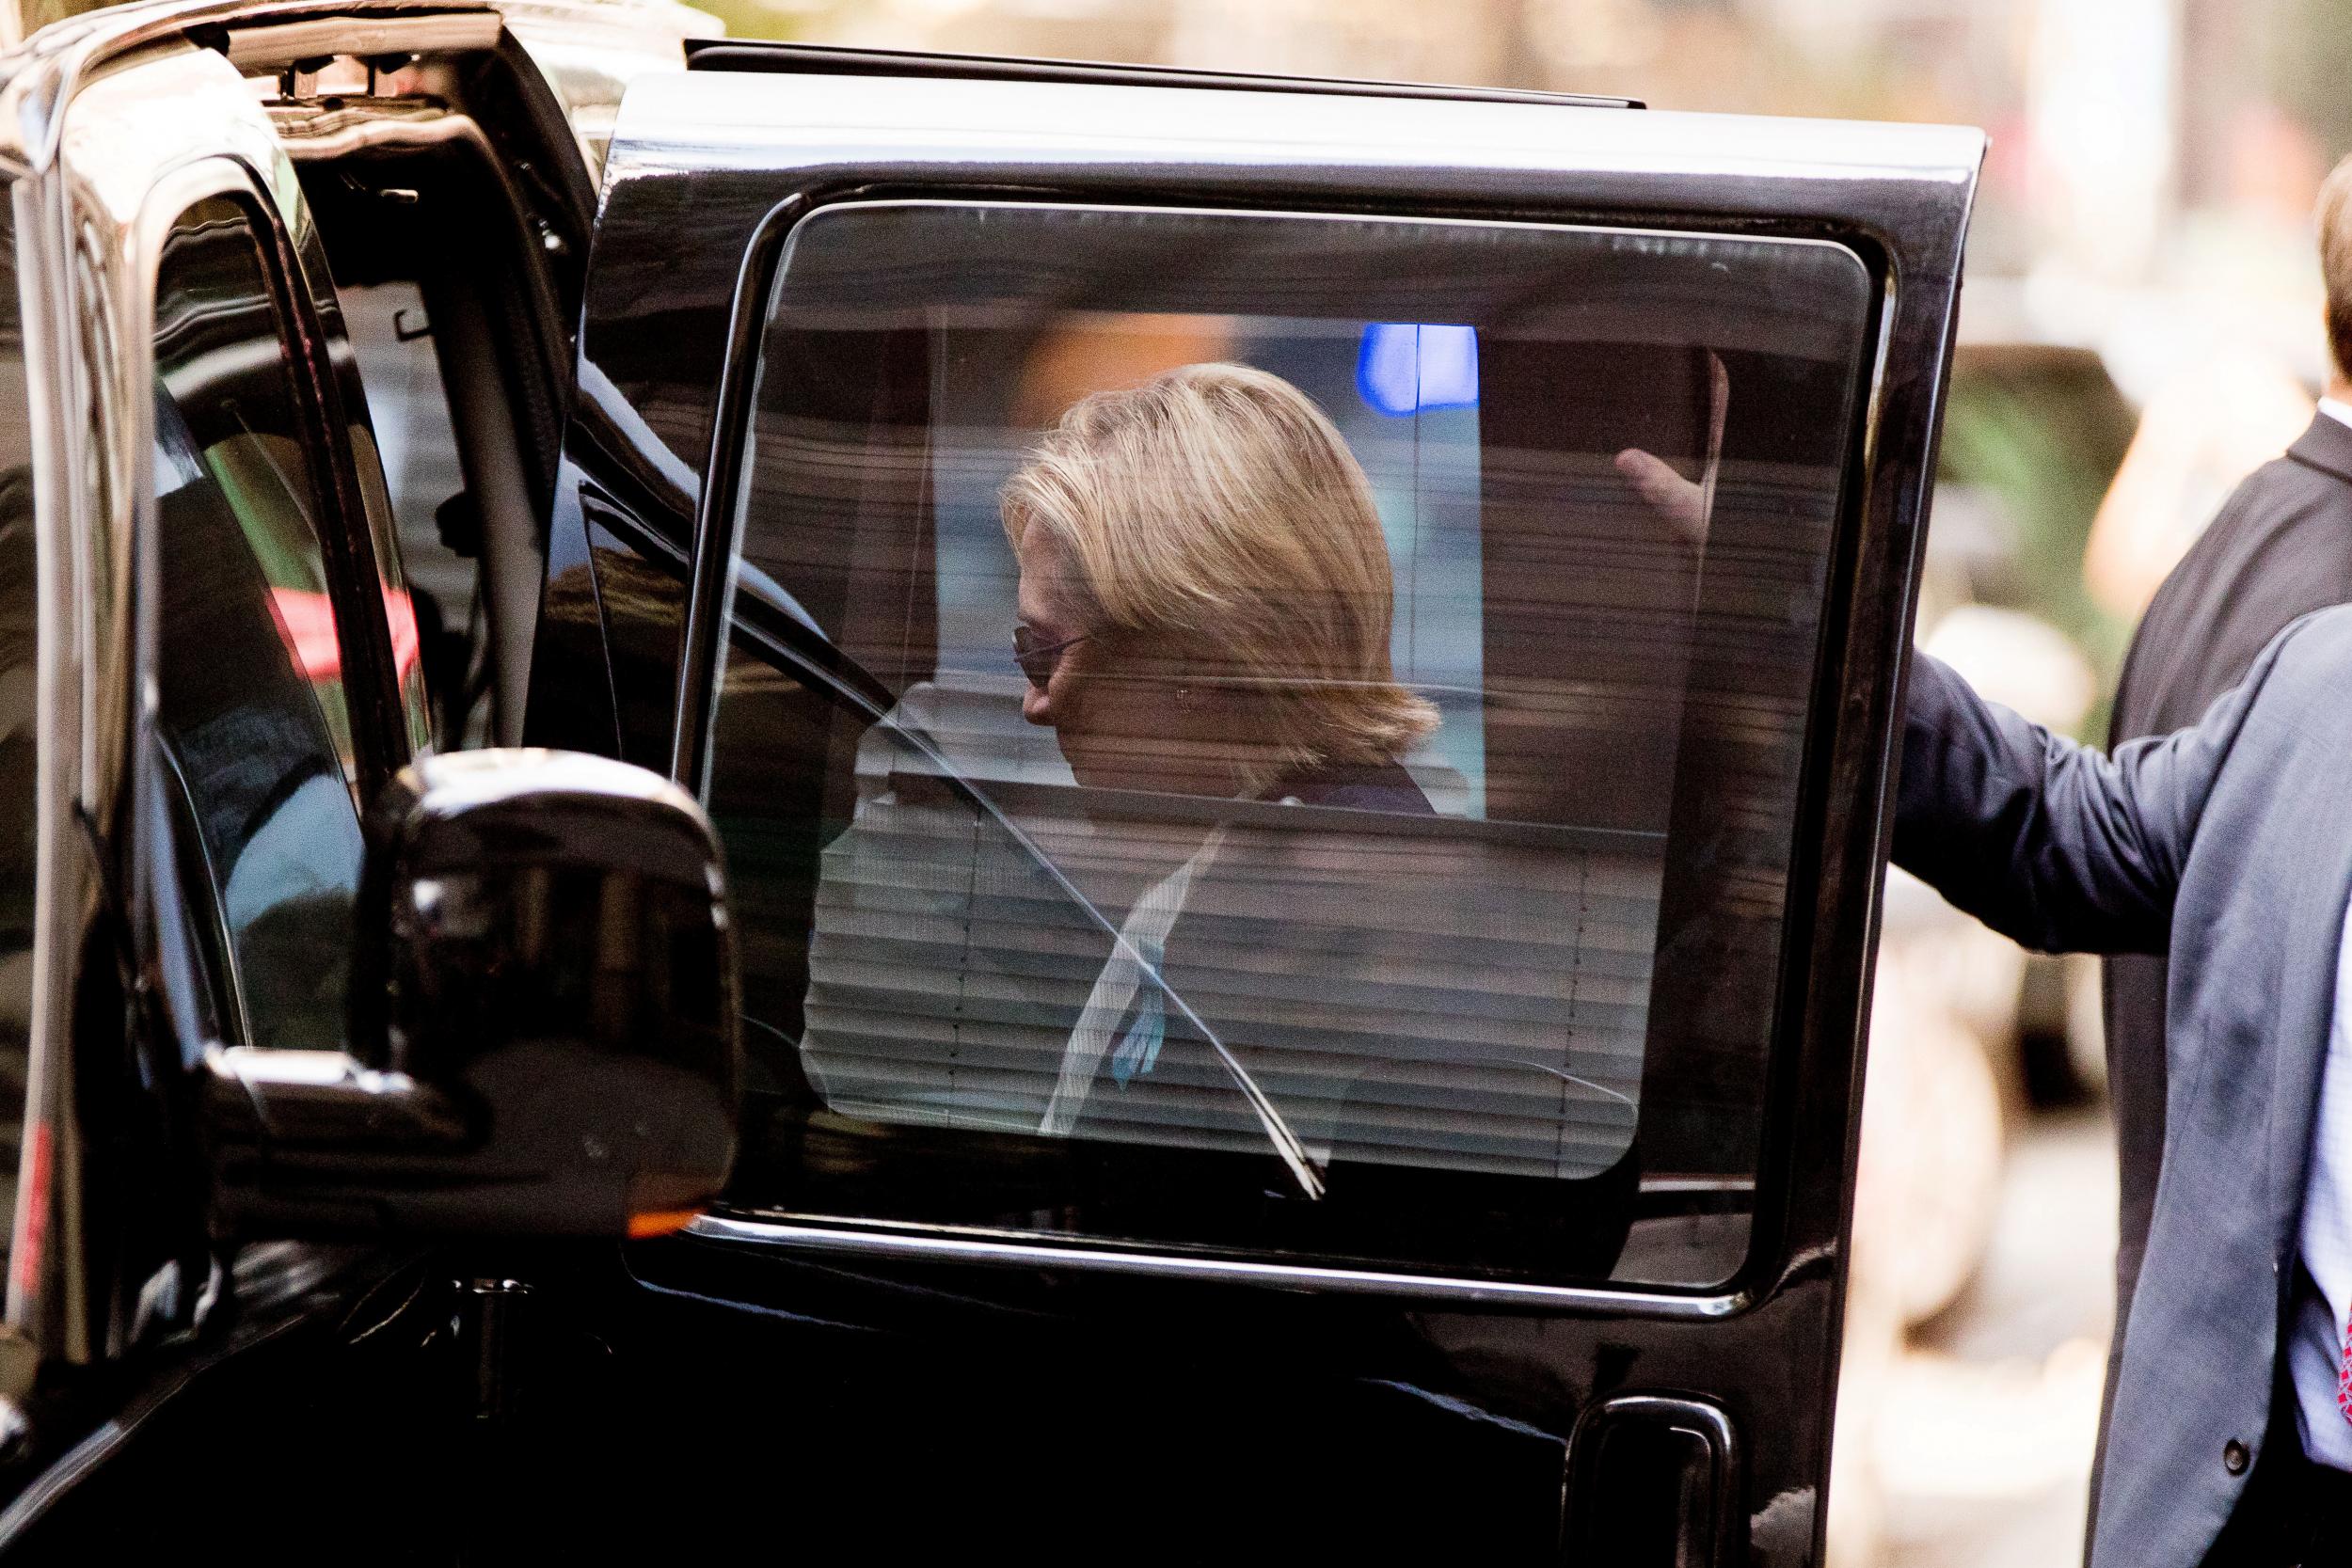 Hillary Clinton gets into a van as she leaves an apartment building in New York hours after she left the 9/11 anniversary memorial early